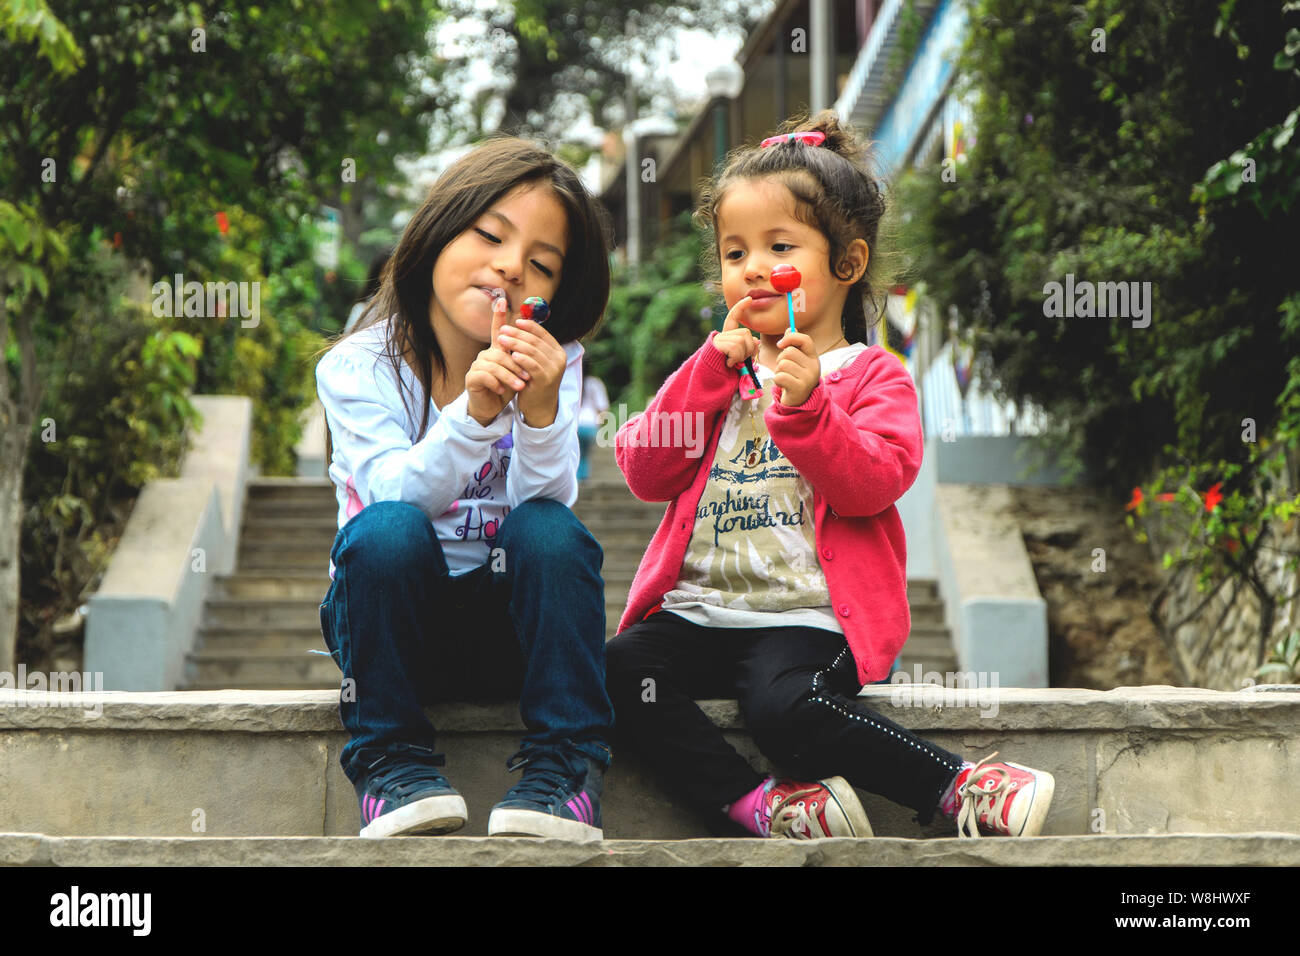 Two girls sitting and eating a lollipop in the park, summer outdoor portrait. best friends Stock Photo